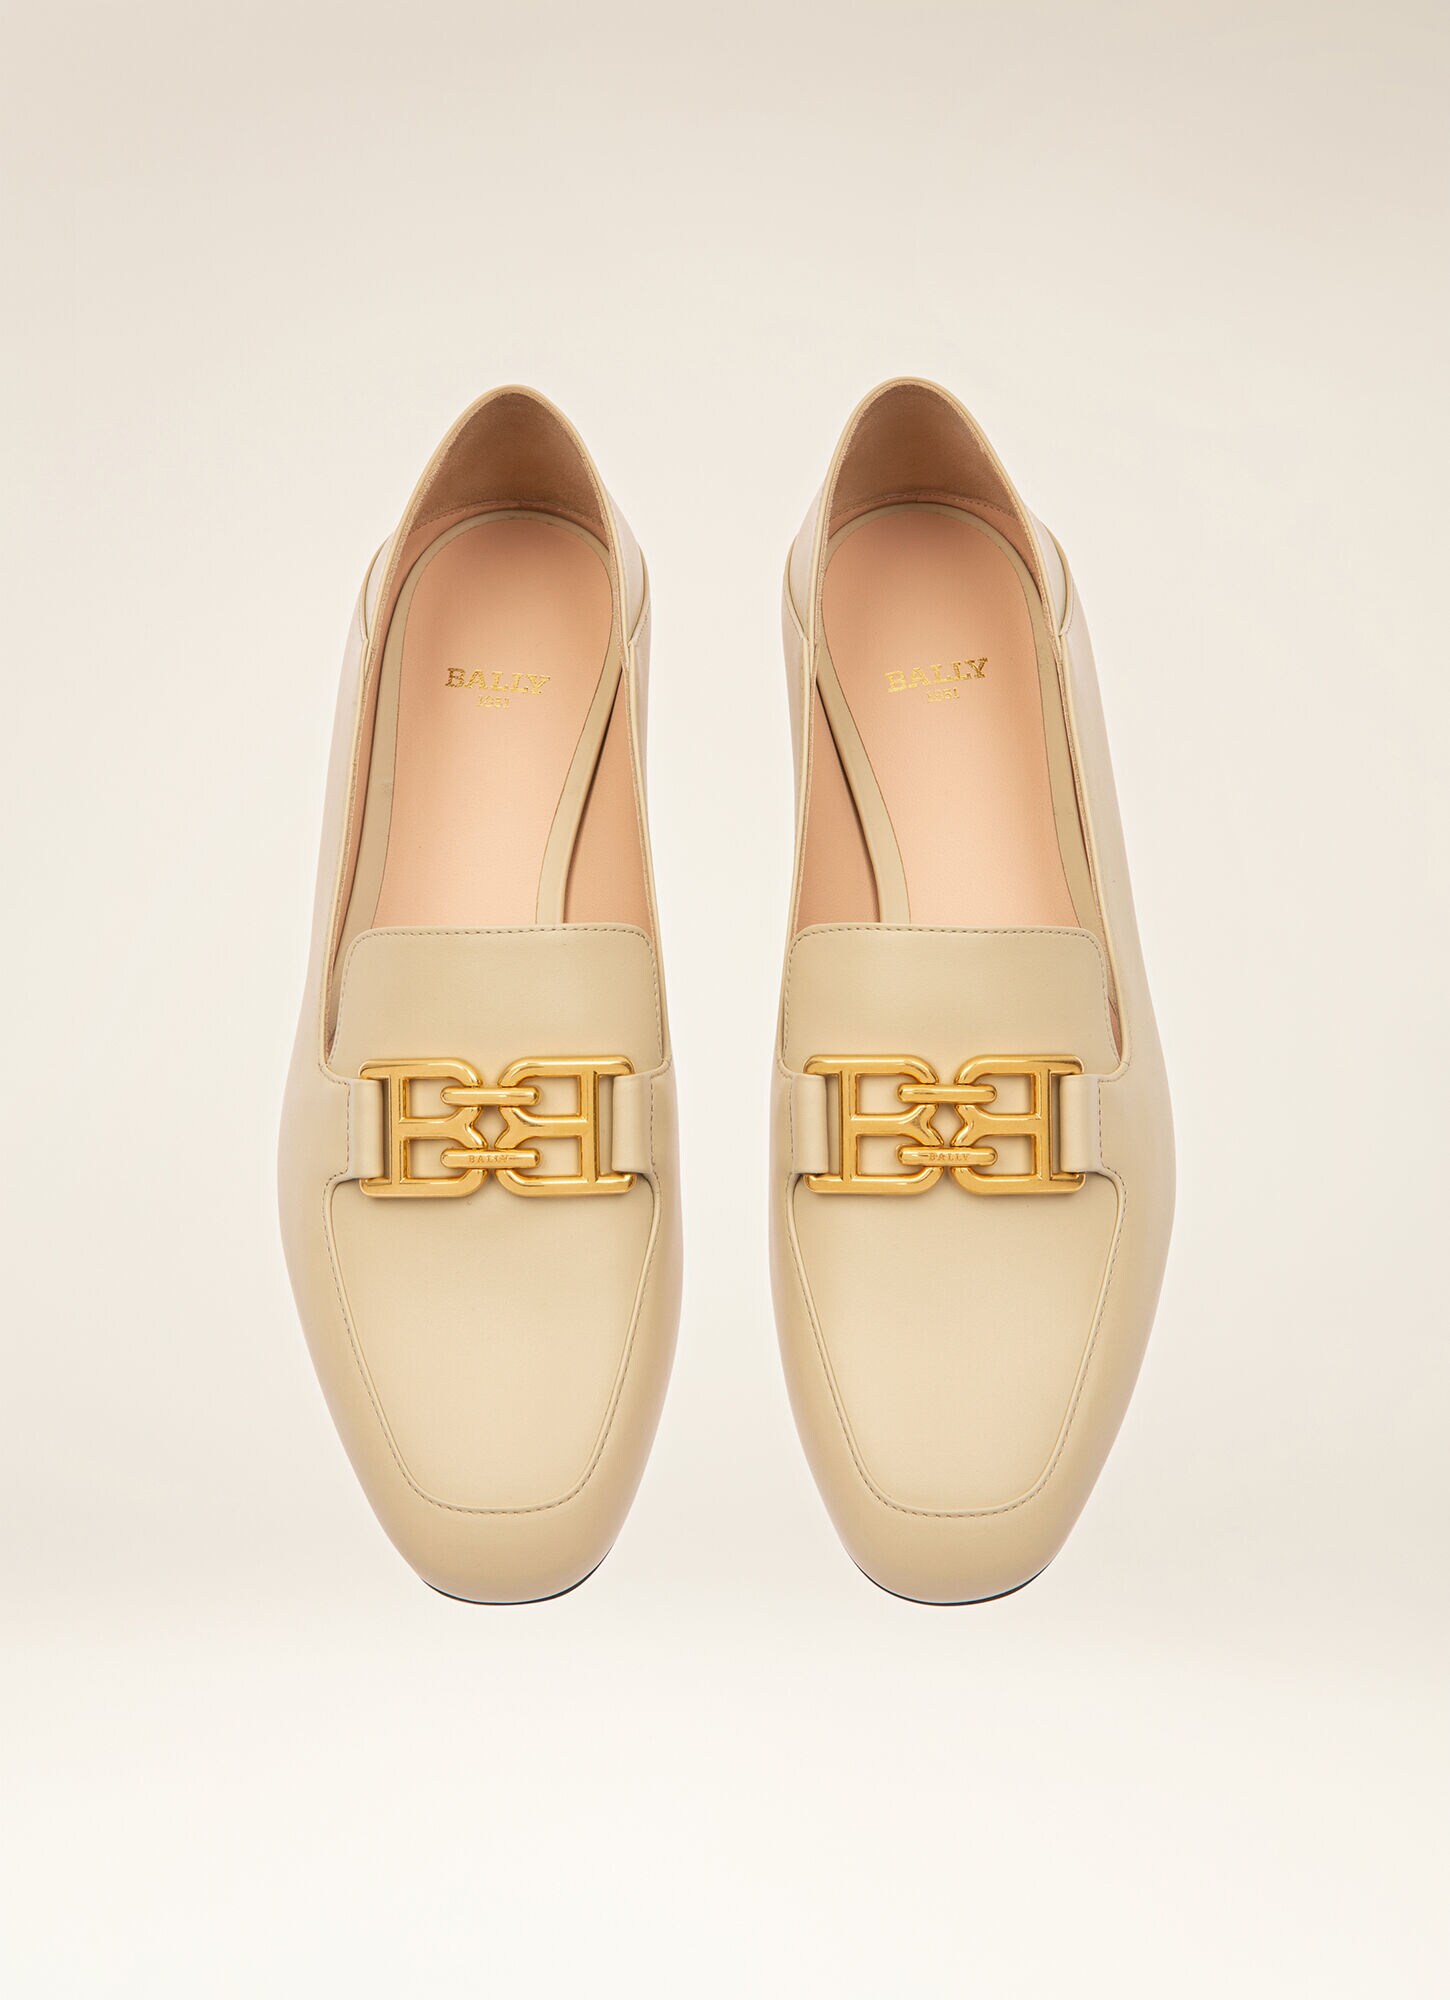 Bally Loafer in Ivory White Womens Shoes Flats and flat shoes Loafers and moccasins 